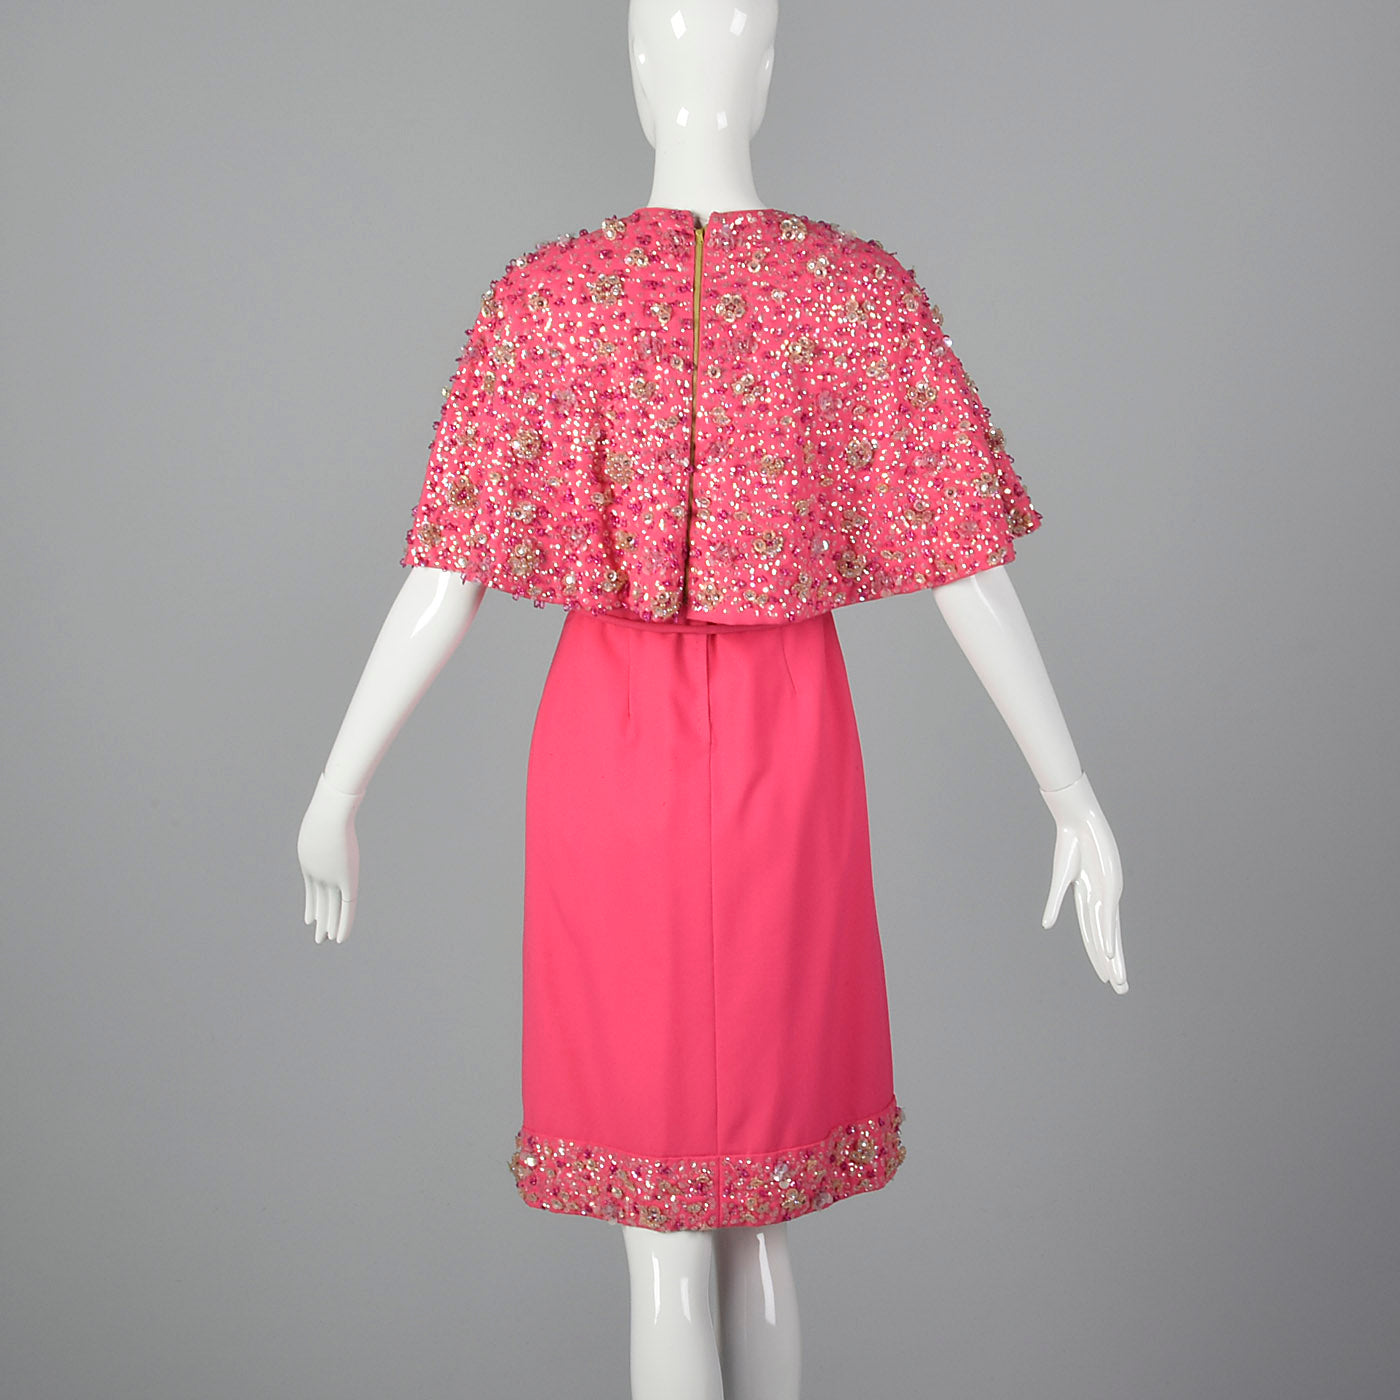 1960s Pink Dress with Matching Beaded Cape